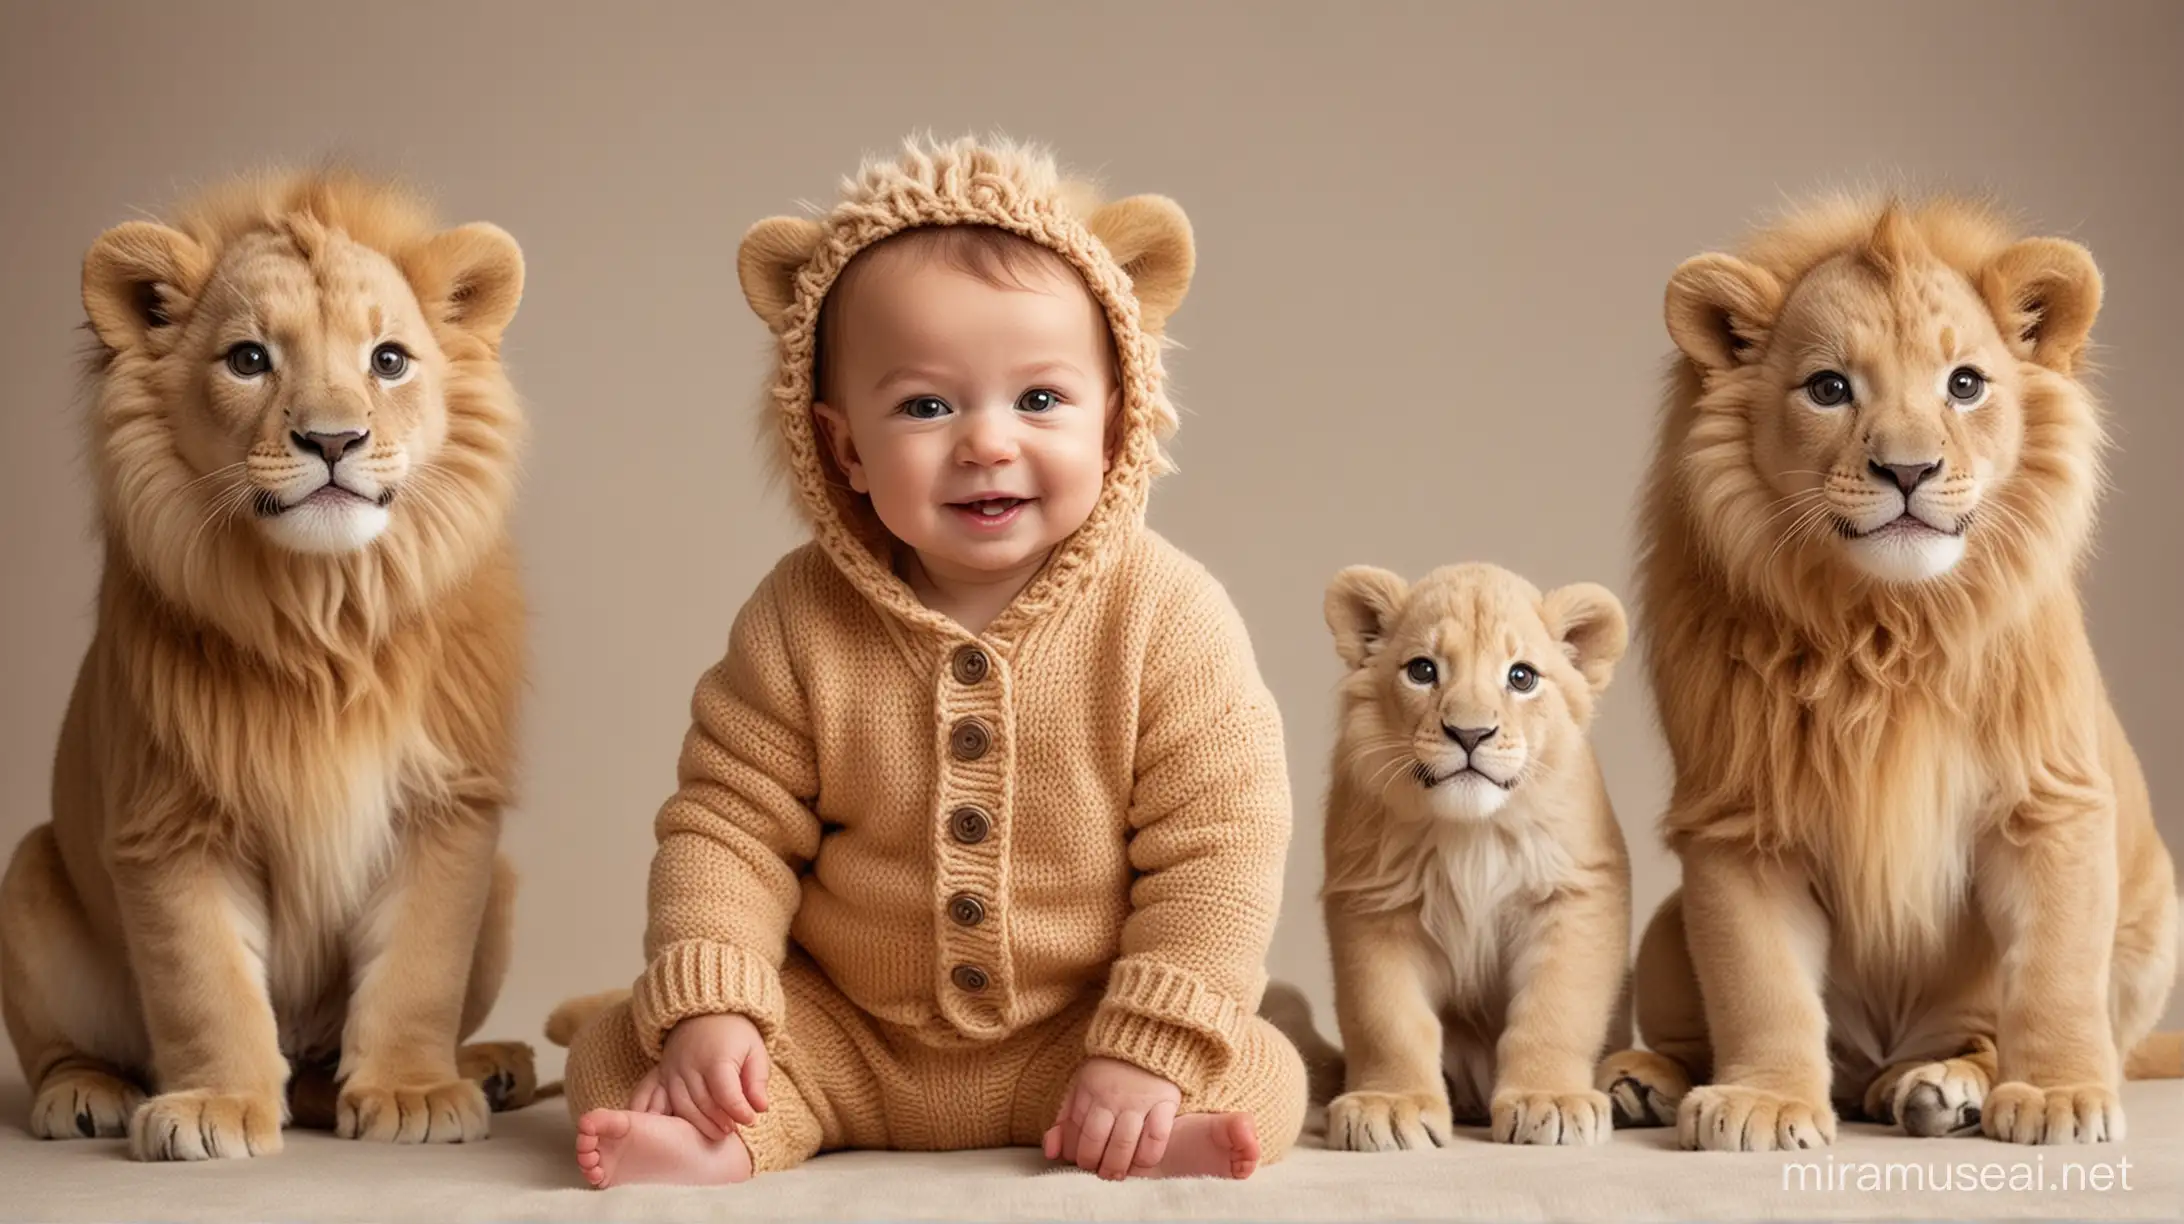 Slim Baby in Knitted Outfit with Kissing Lion Pair